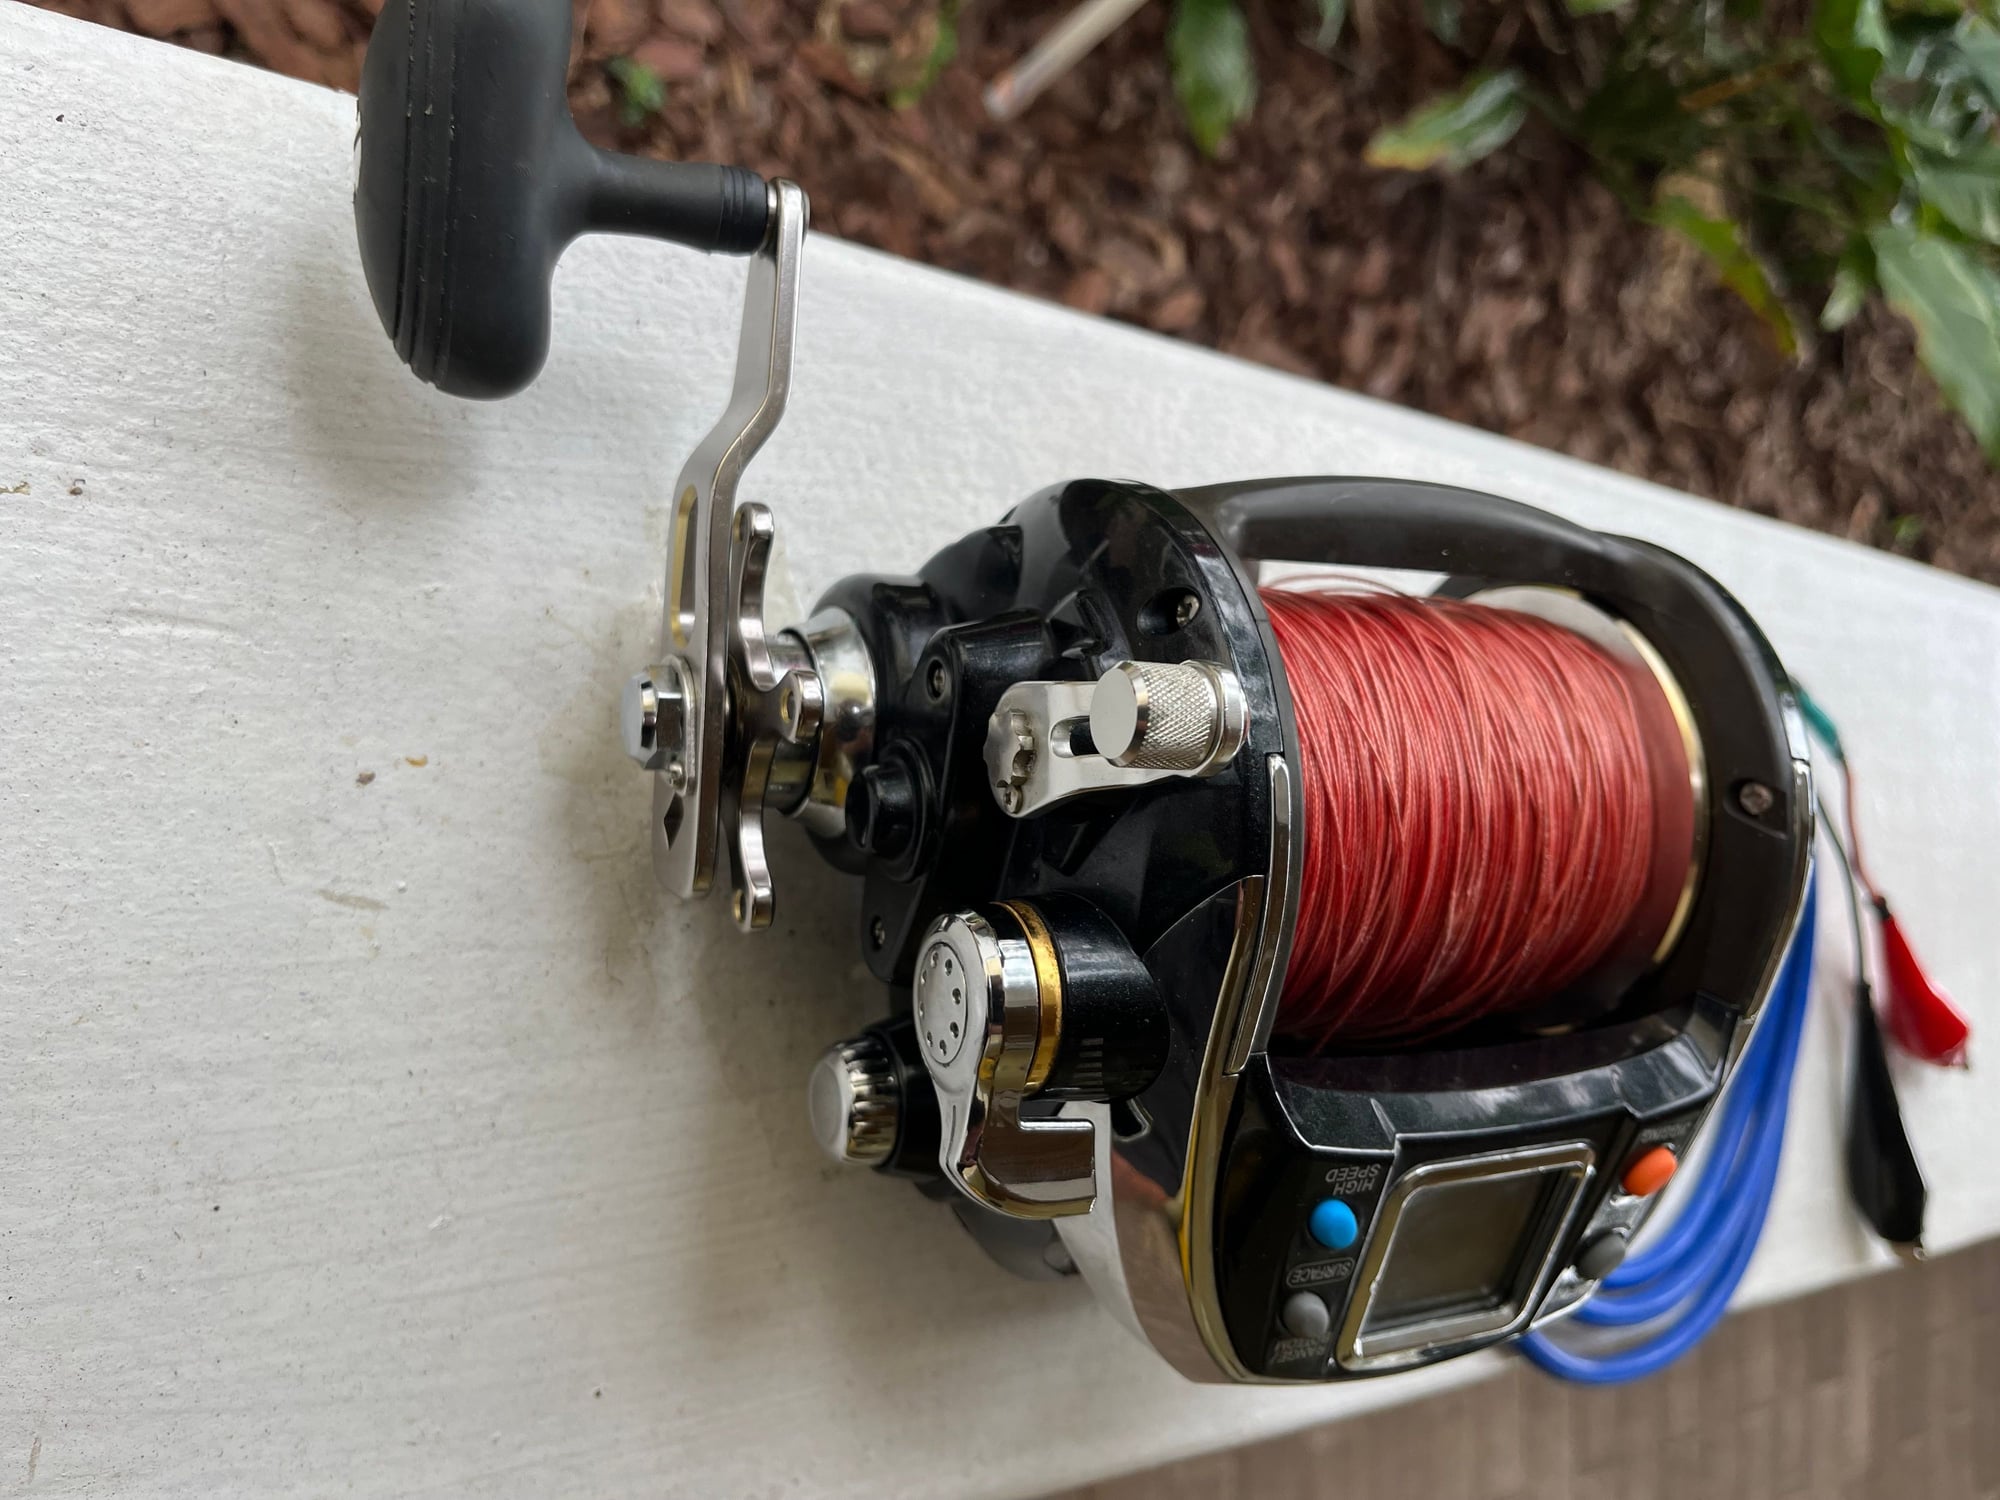 Banax Kaigen 1000 electric reel - The Hull Truth - Boating and